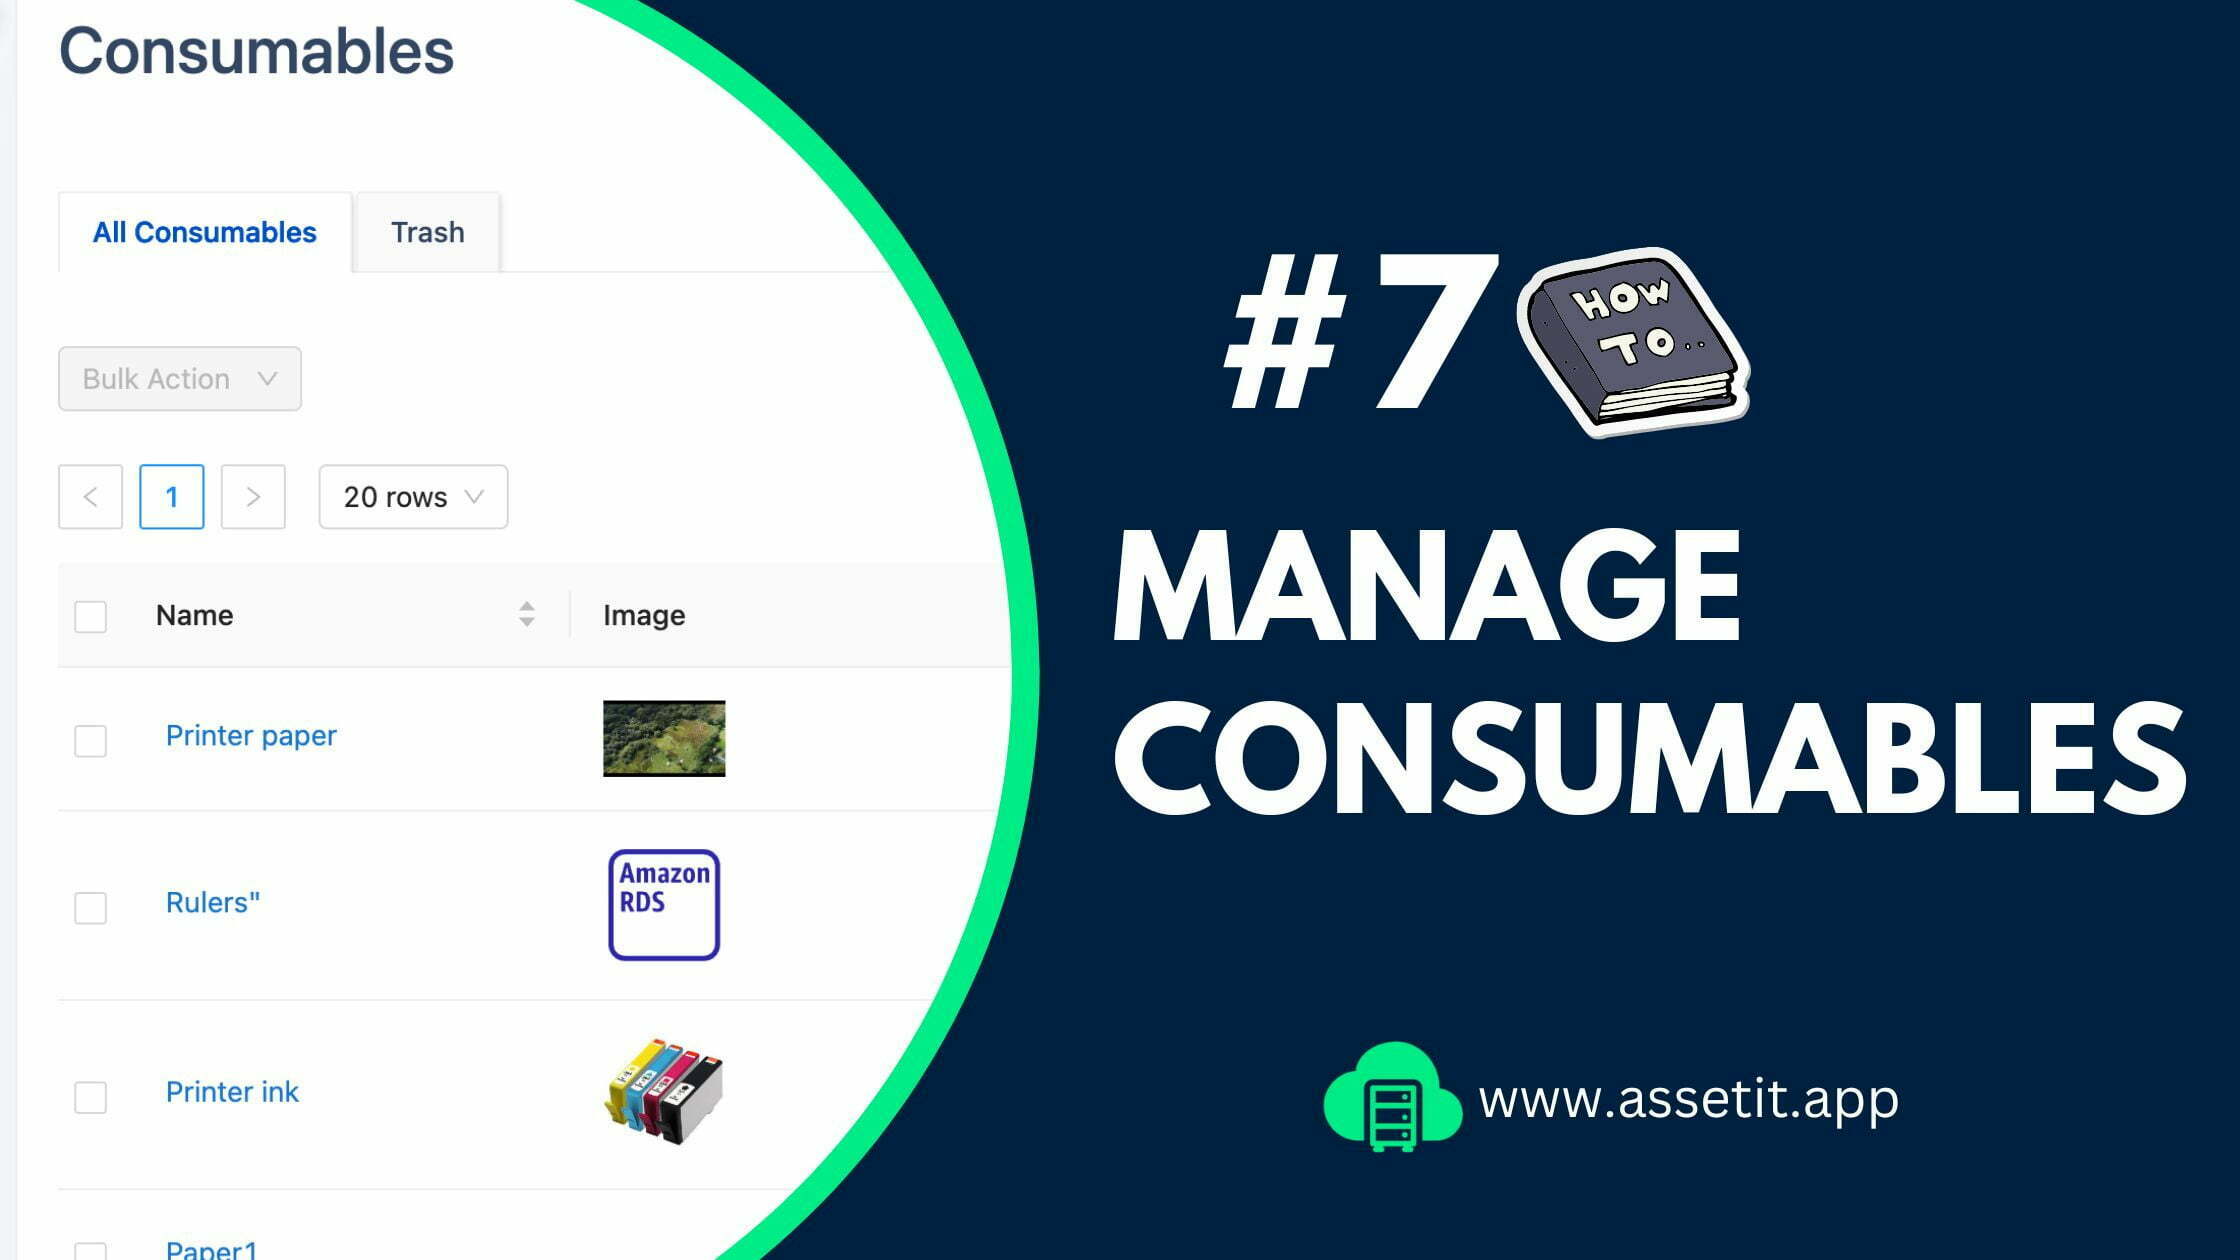 How to manage consumables on AssetIT